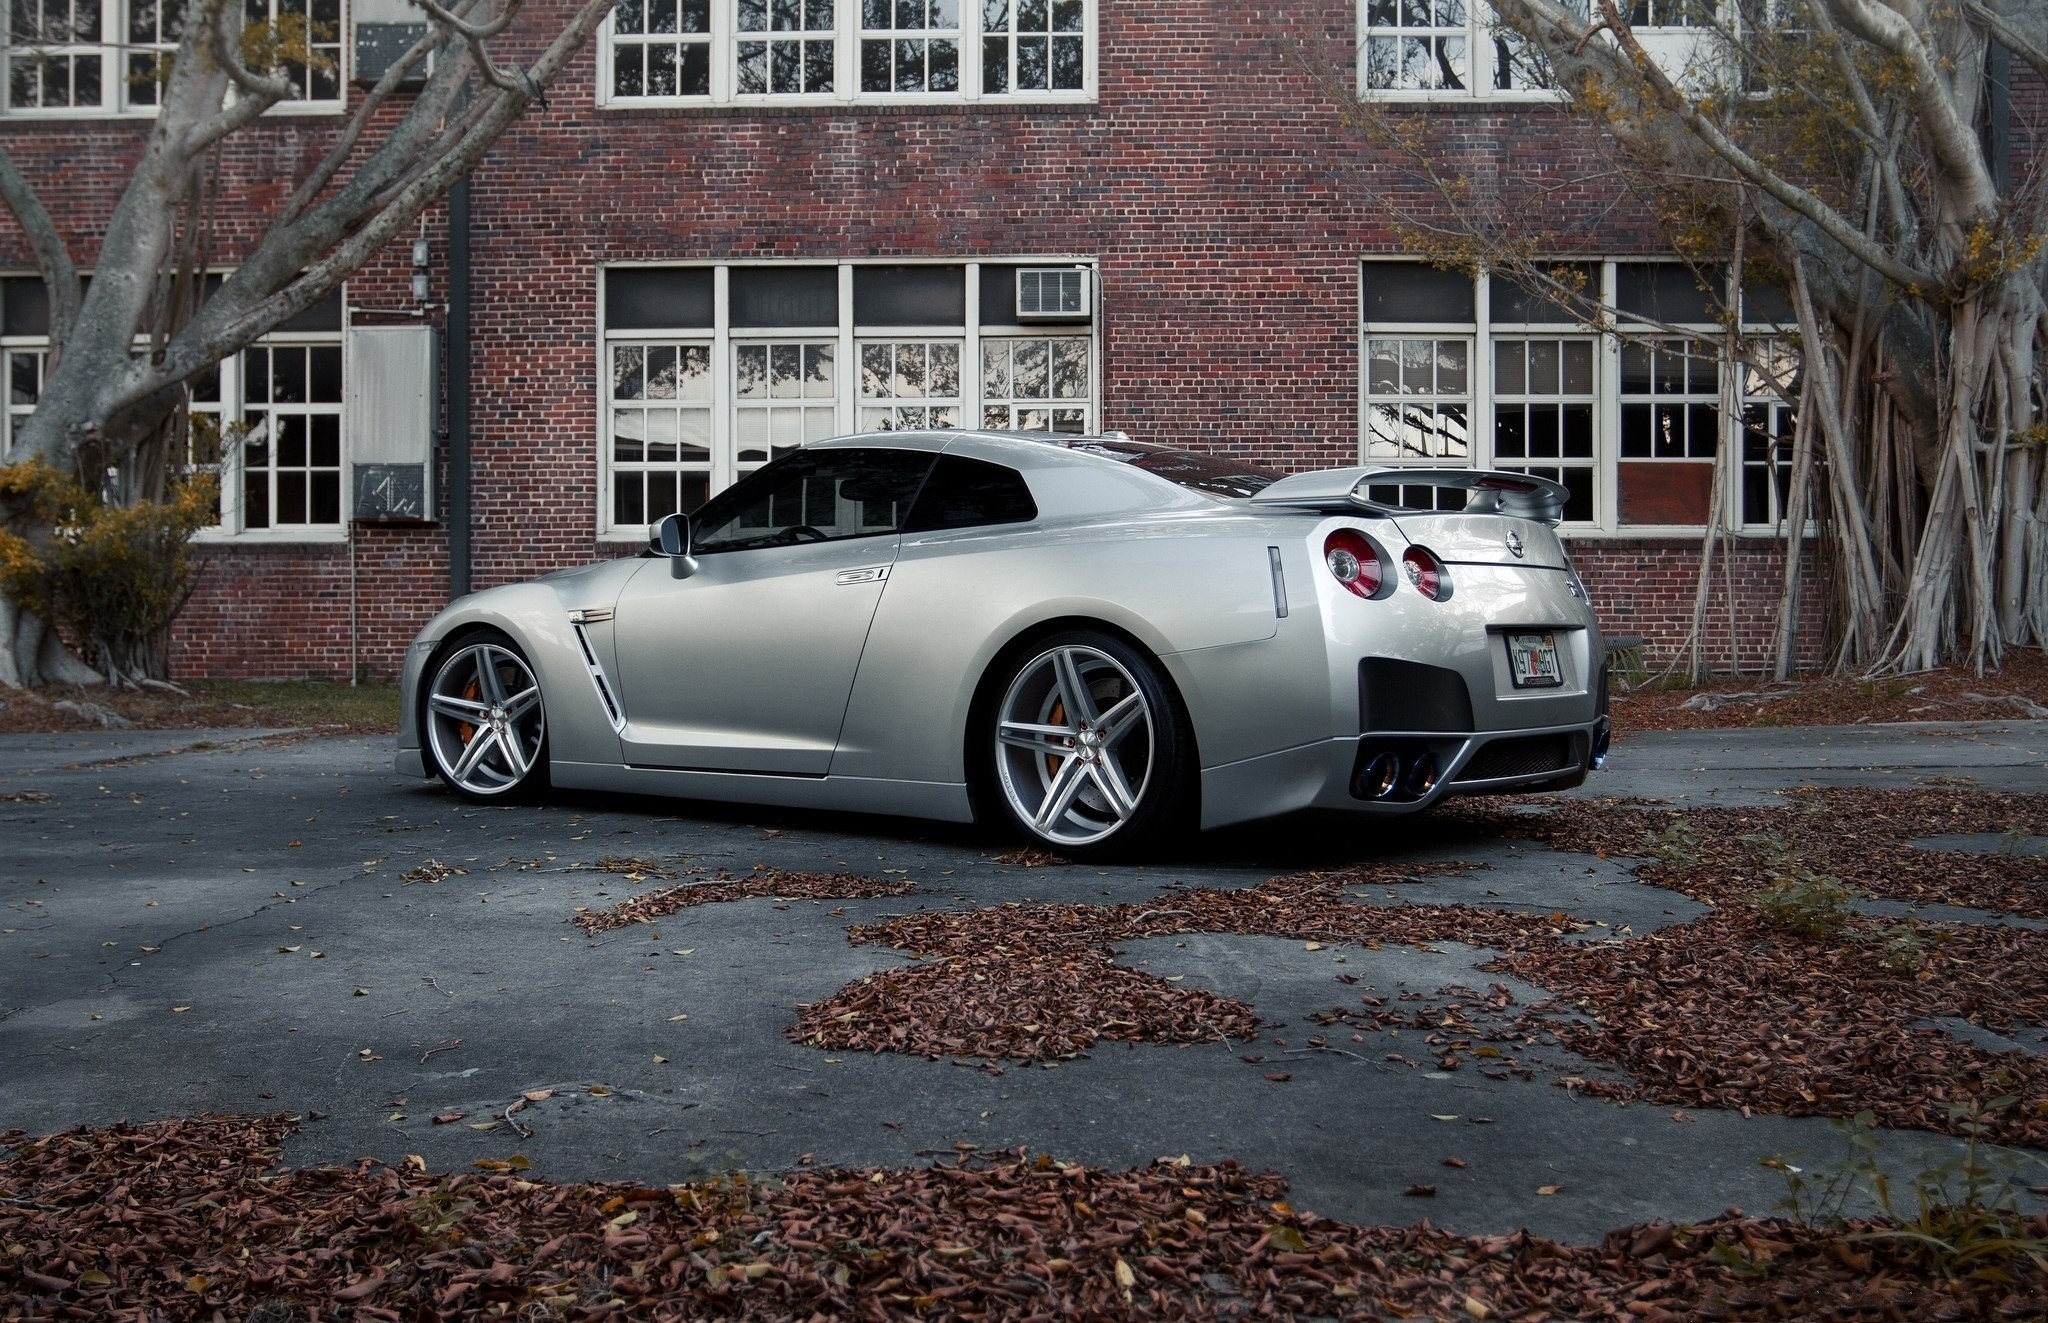 Nissan Gt-R auto, grey, cars 8k Backgrounds